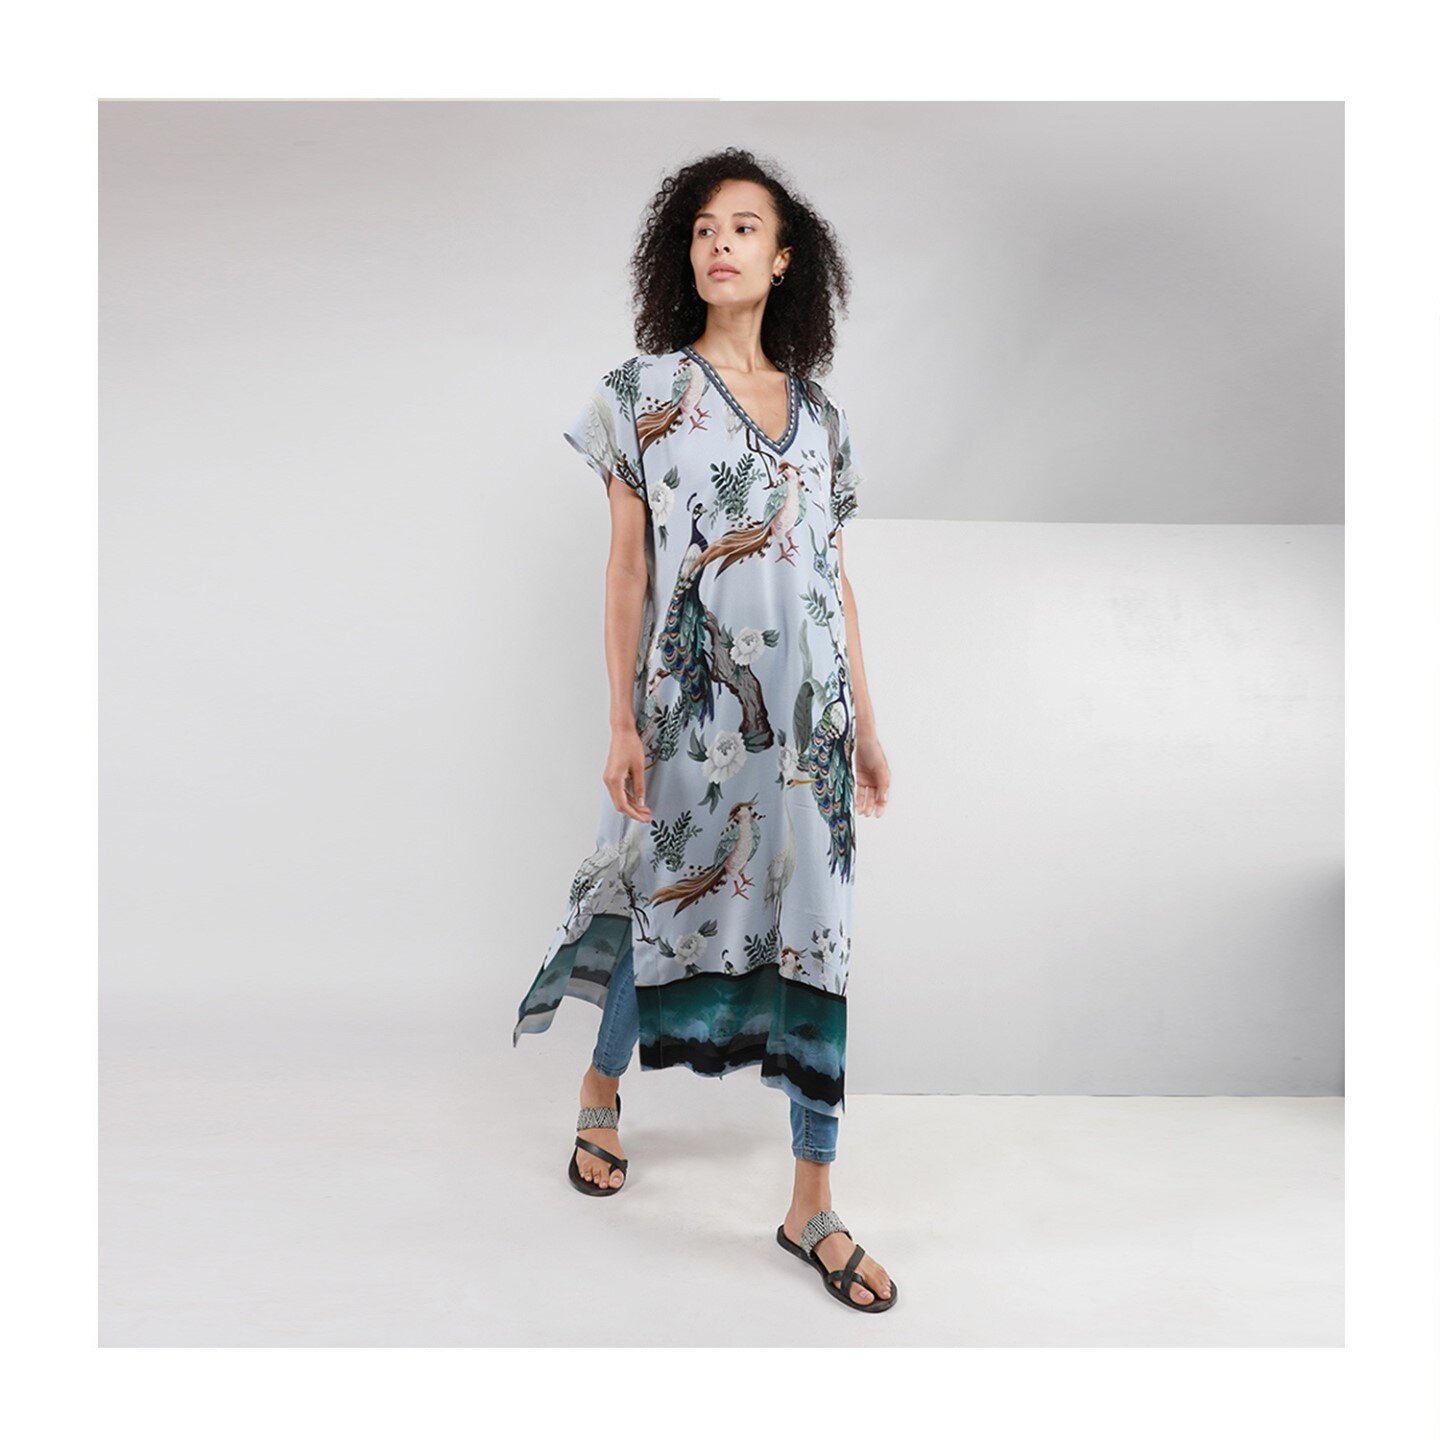 A transitional colour palette, a subtle hand detailed interlacement neckline and a dramatic tie dye inspo border make this piece a perfect multi-use wardrobe addition. Layer over skinny jeans with a pair of trainers, a bikini and sandals , or with he